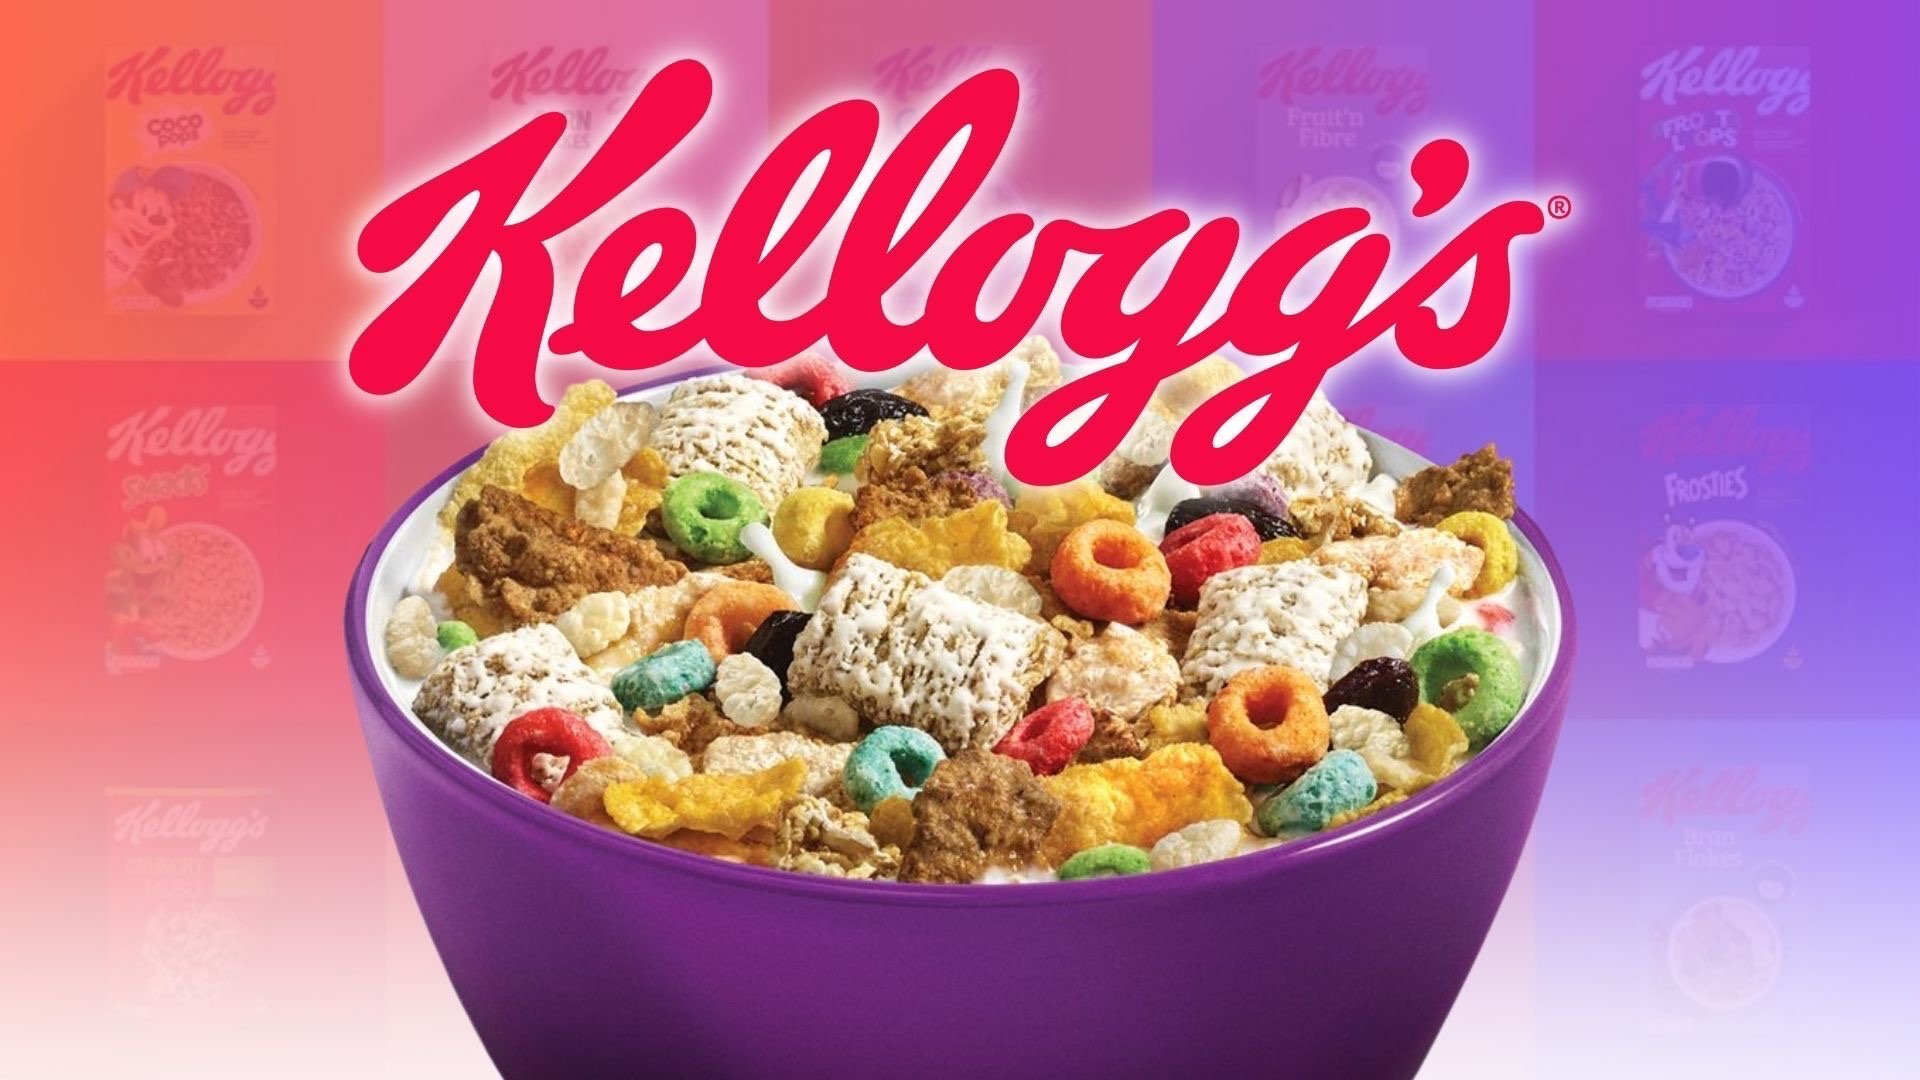 Kellogg's Joins the NFT Movement: Trademarks Hint at Digital Expansion